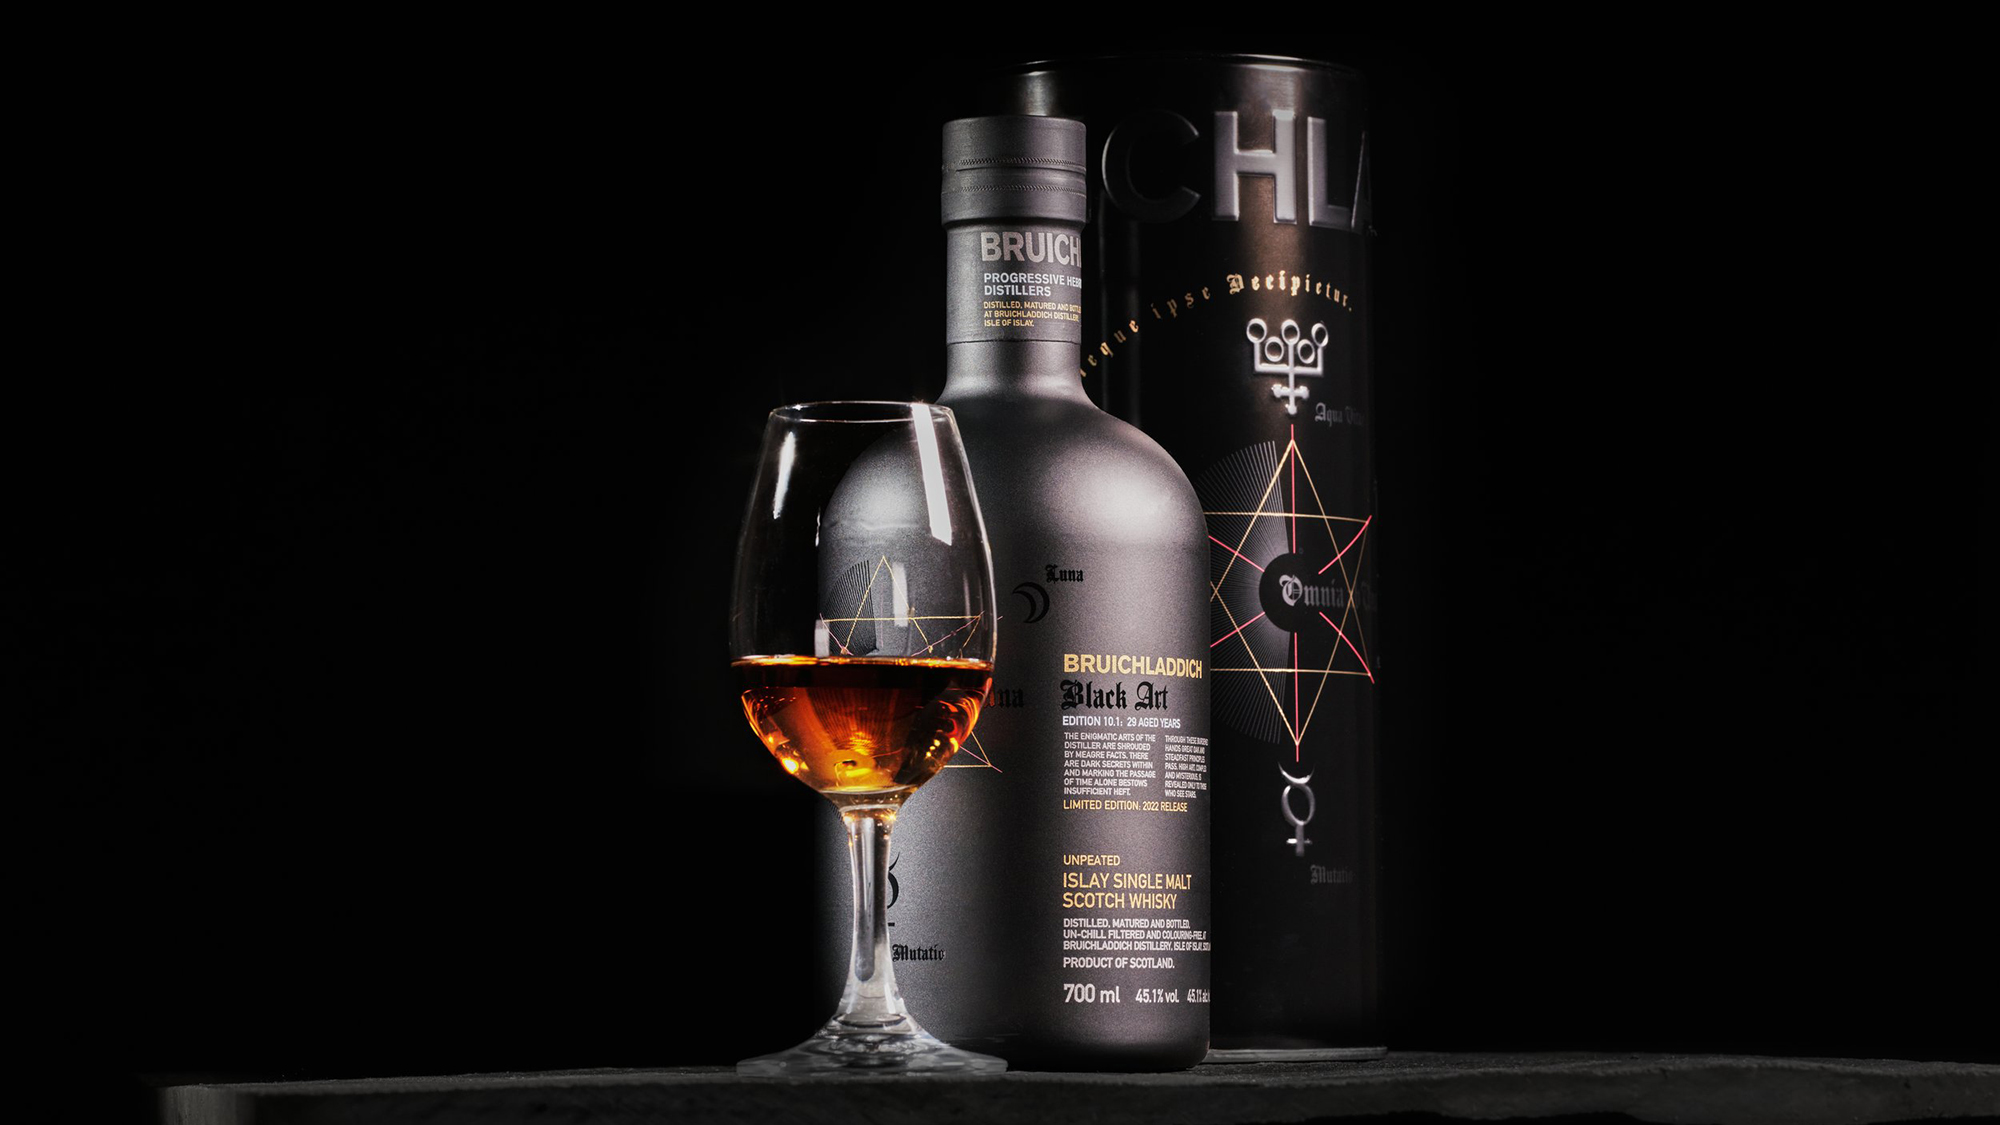 Bruichladdich Black Art 10 Is A 29-Year-Old Scotch Shrouded In Delicious Mystery